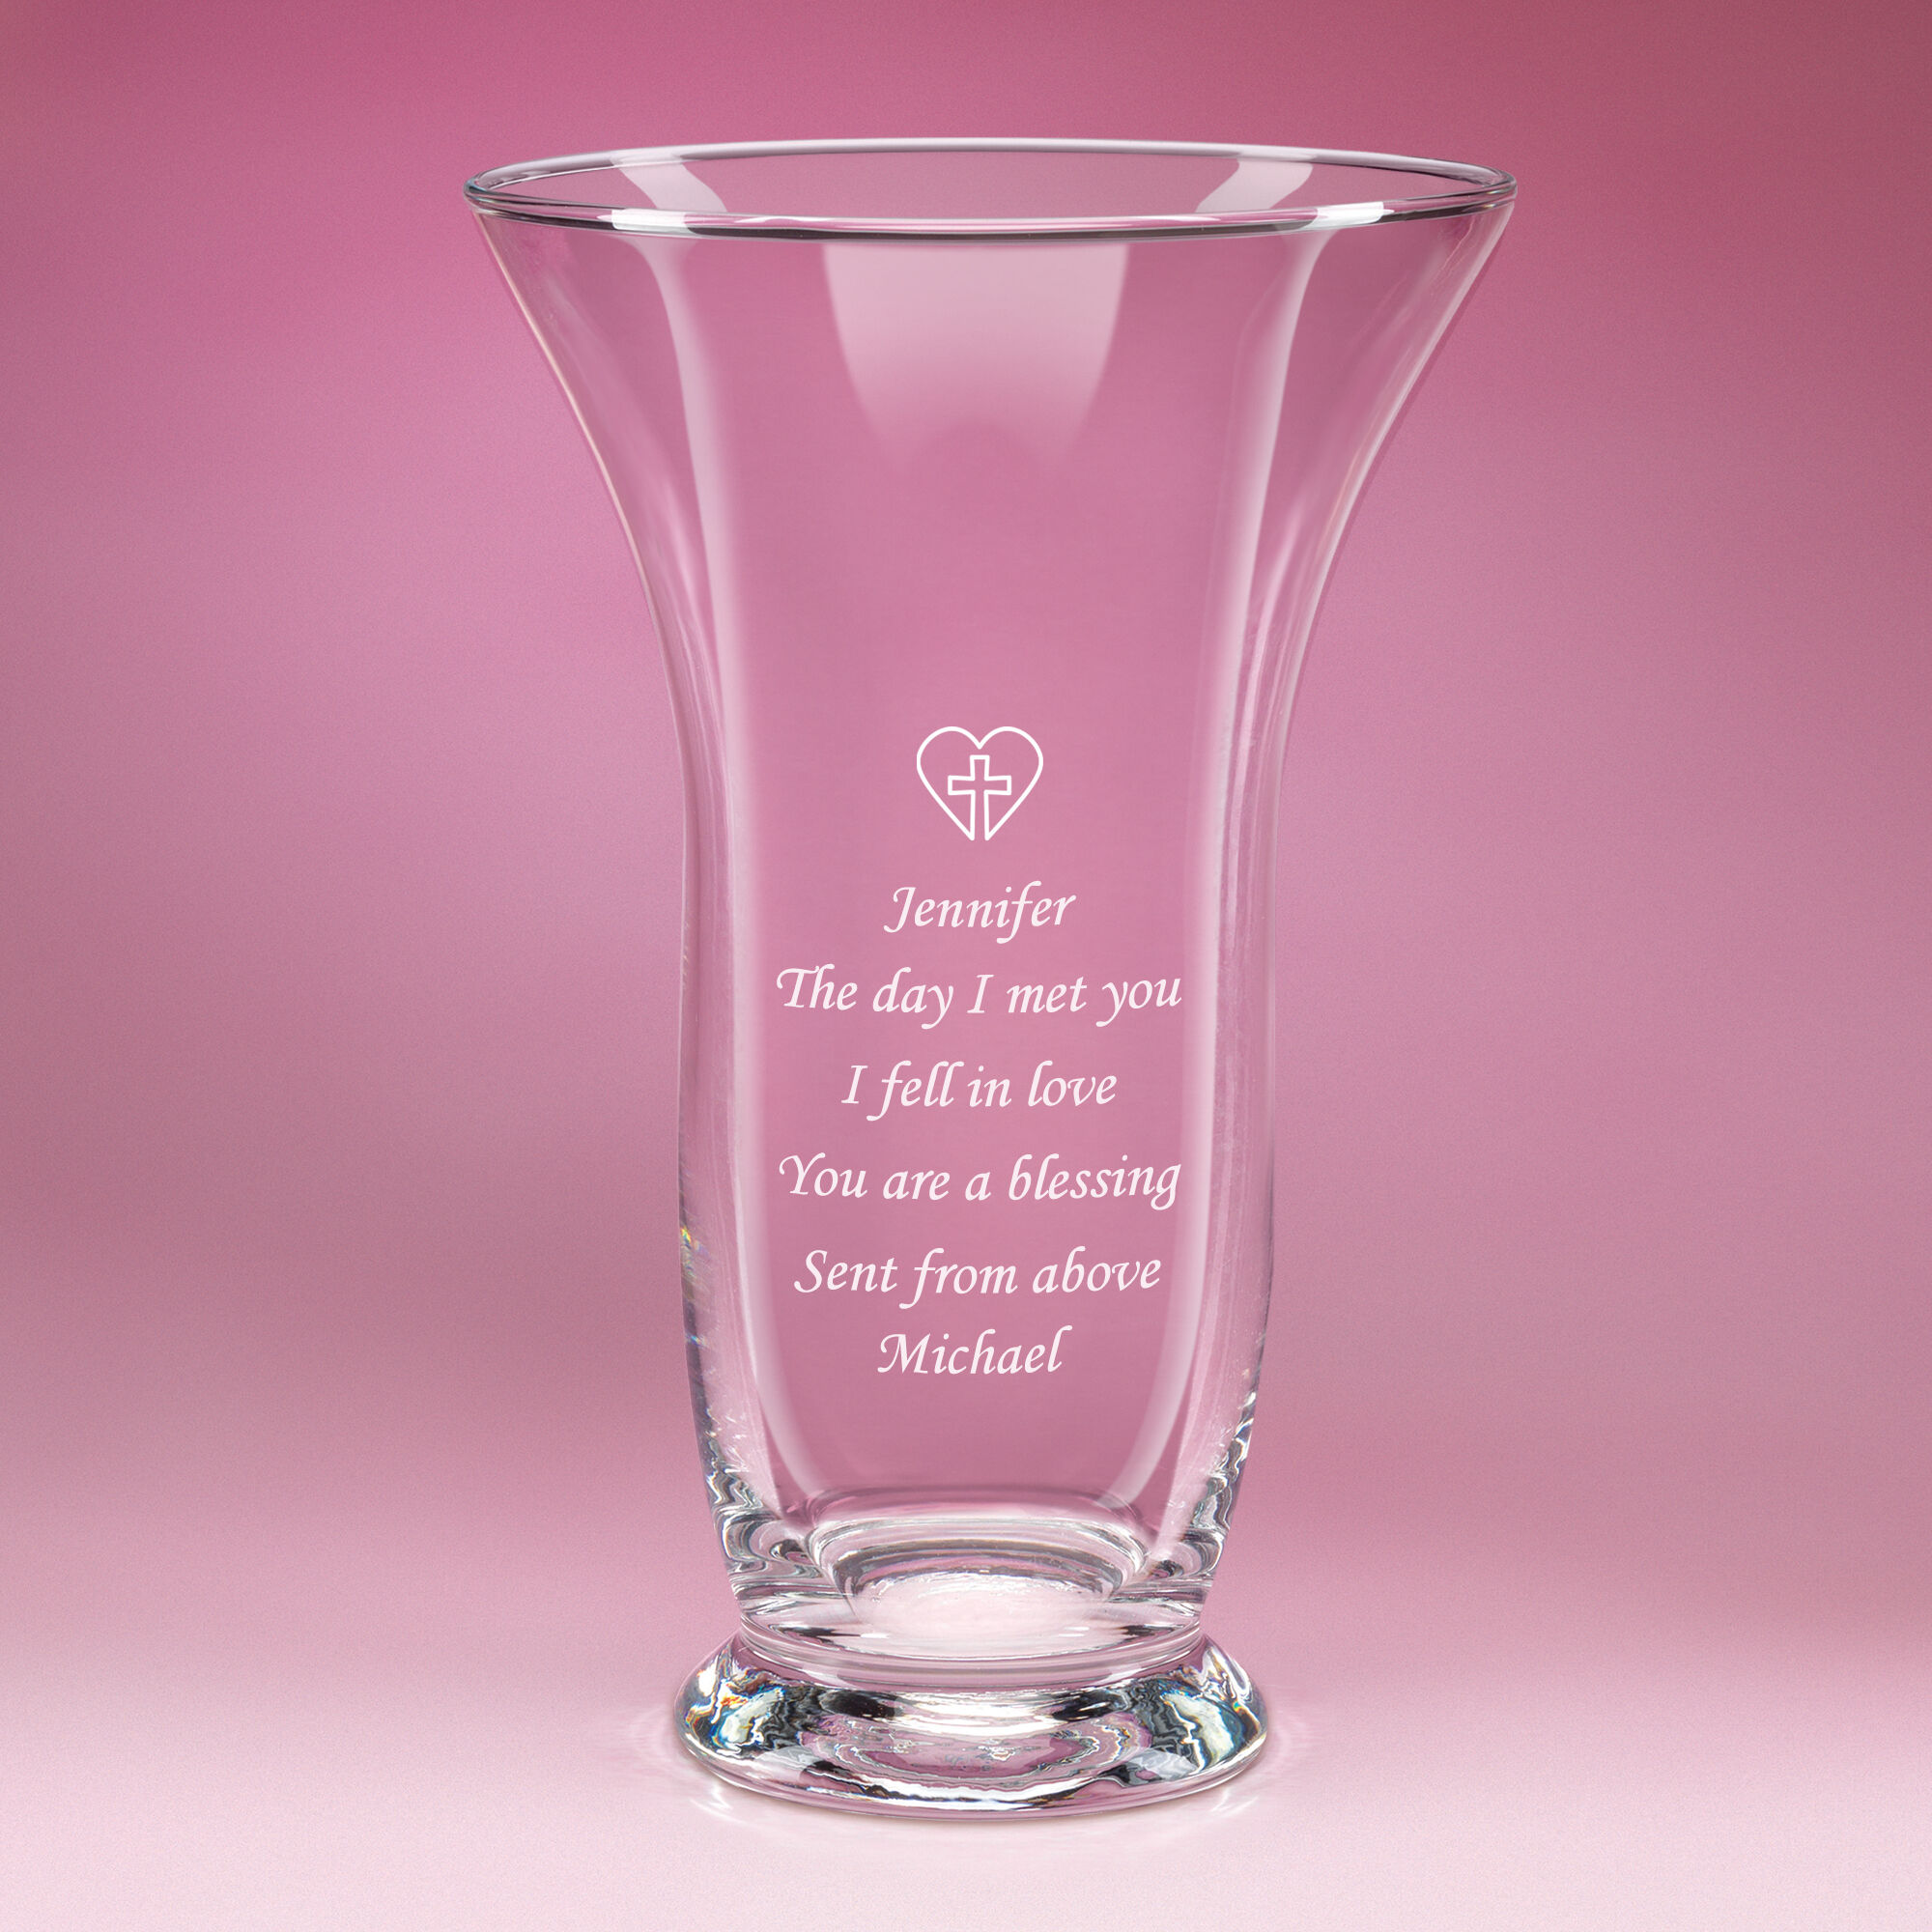 The Personalized Blessing Vase 10157 0034 d pink